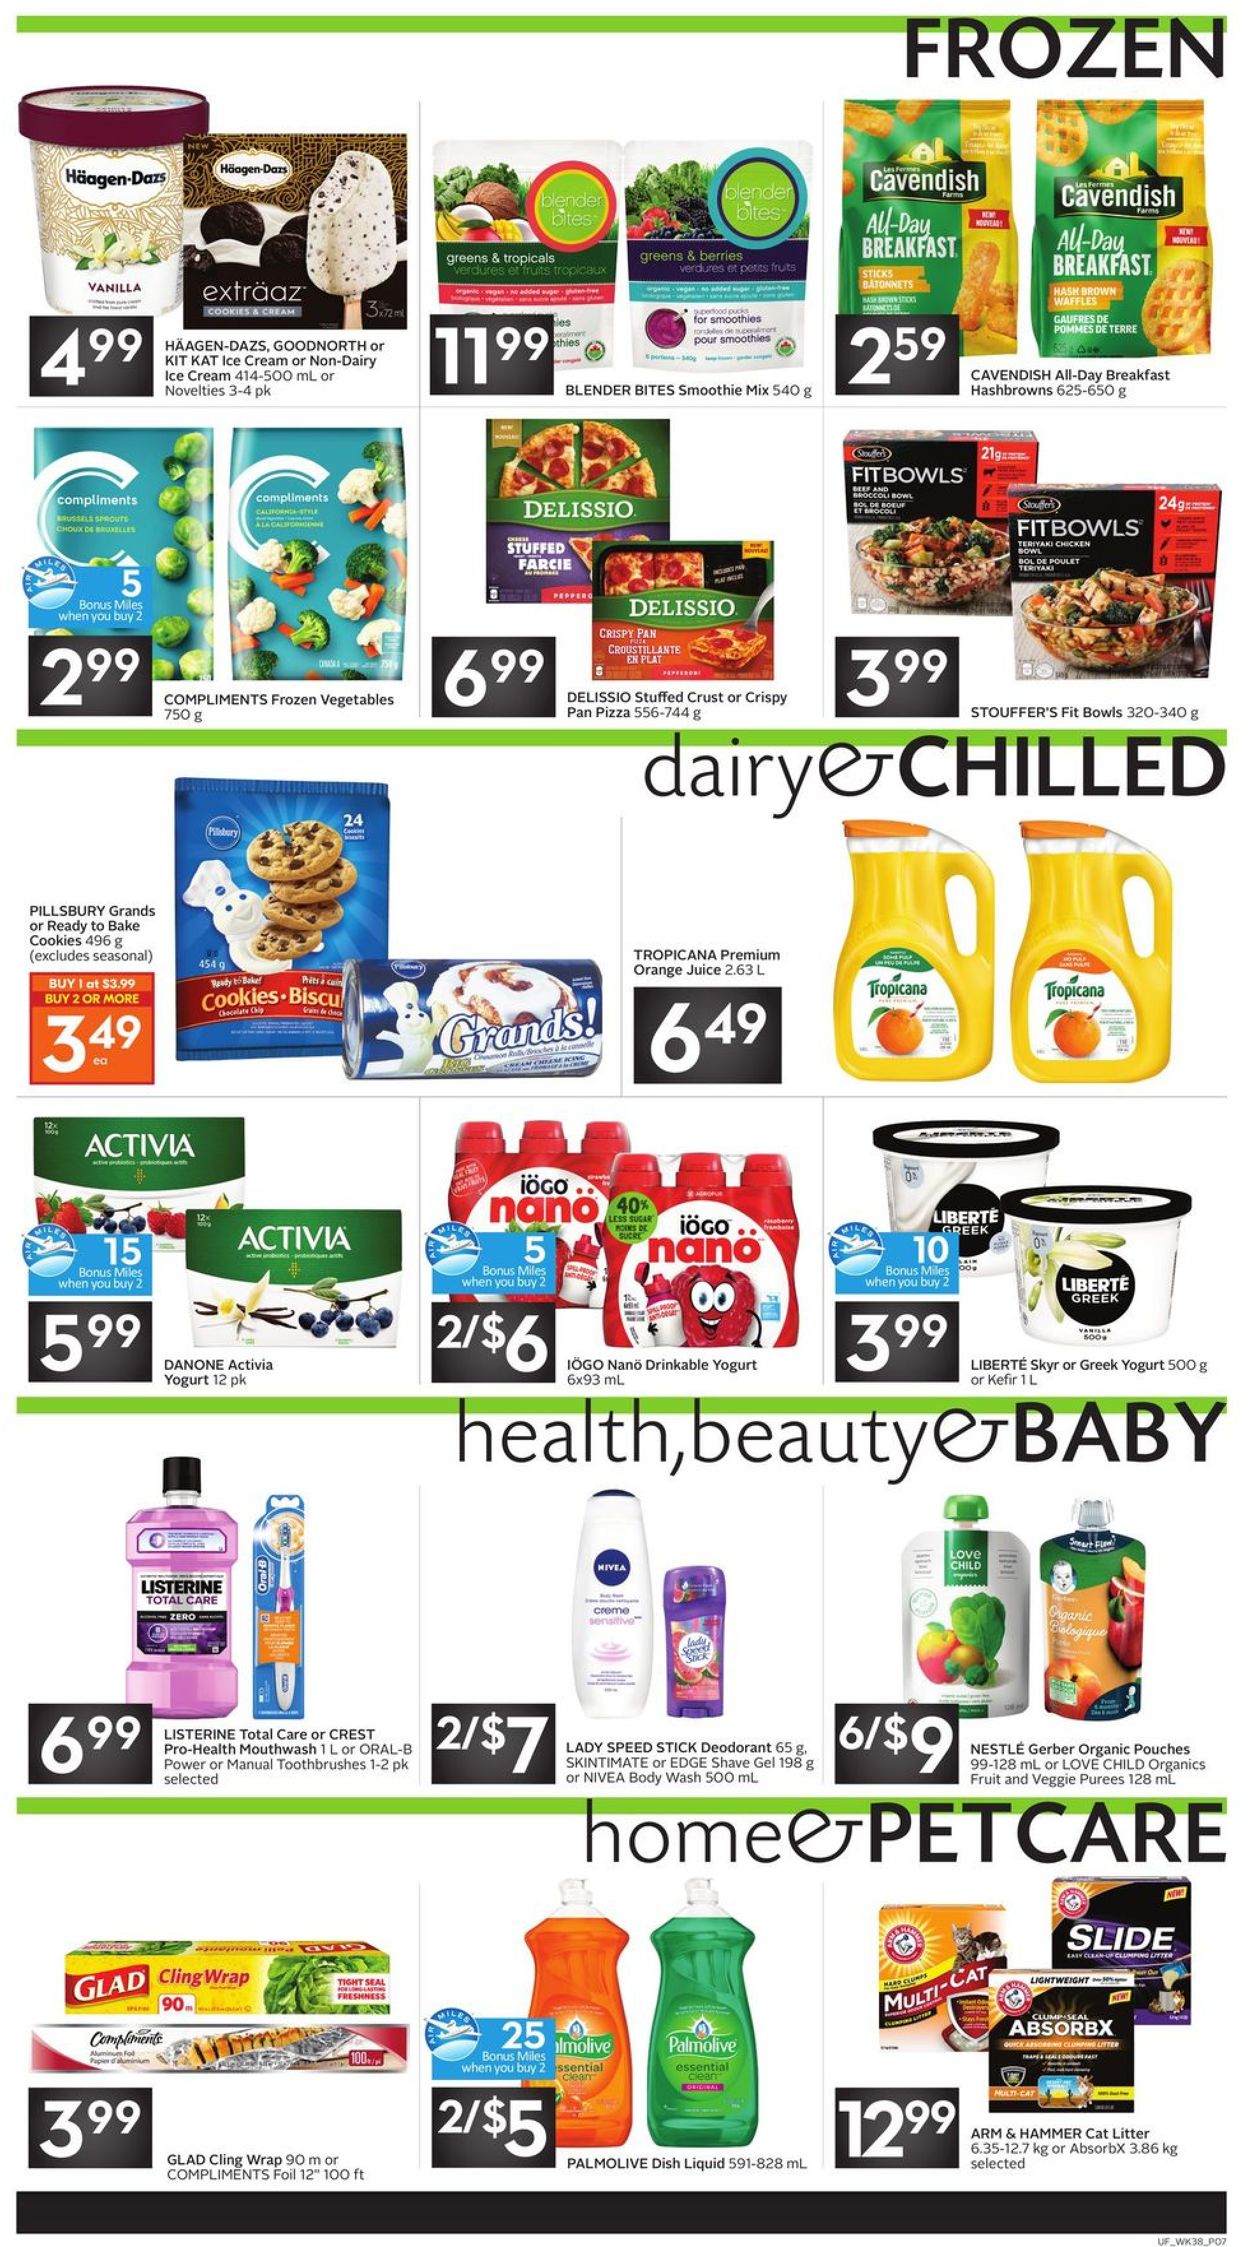 Sobeys Flyer from 01/14/2021